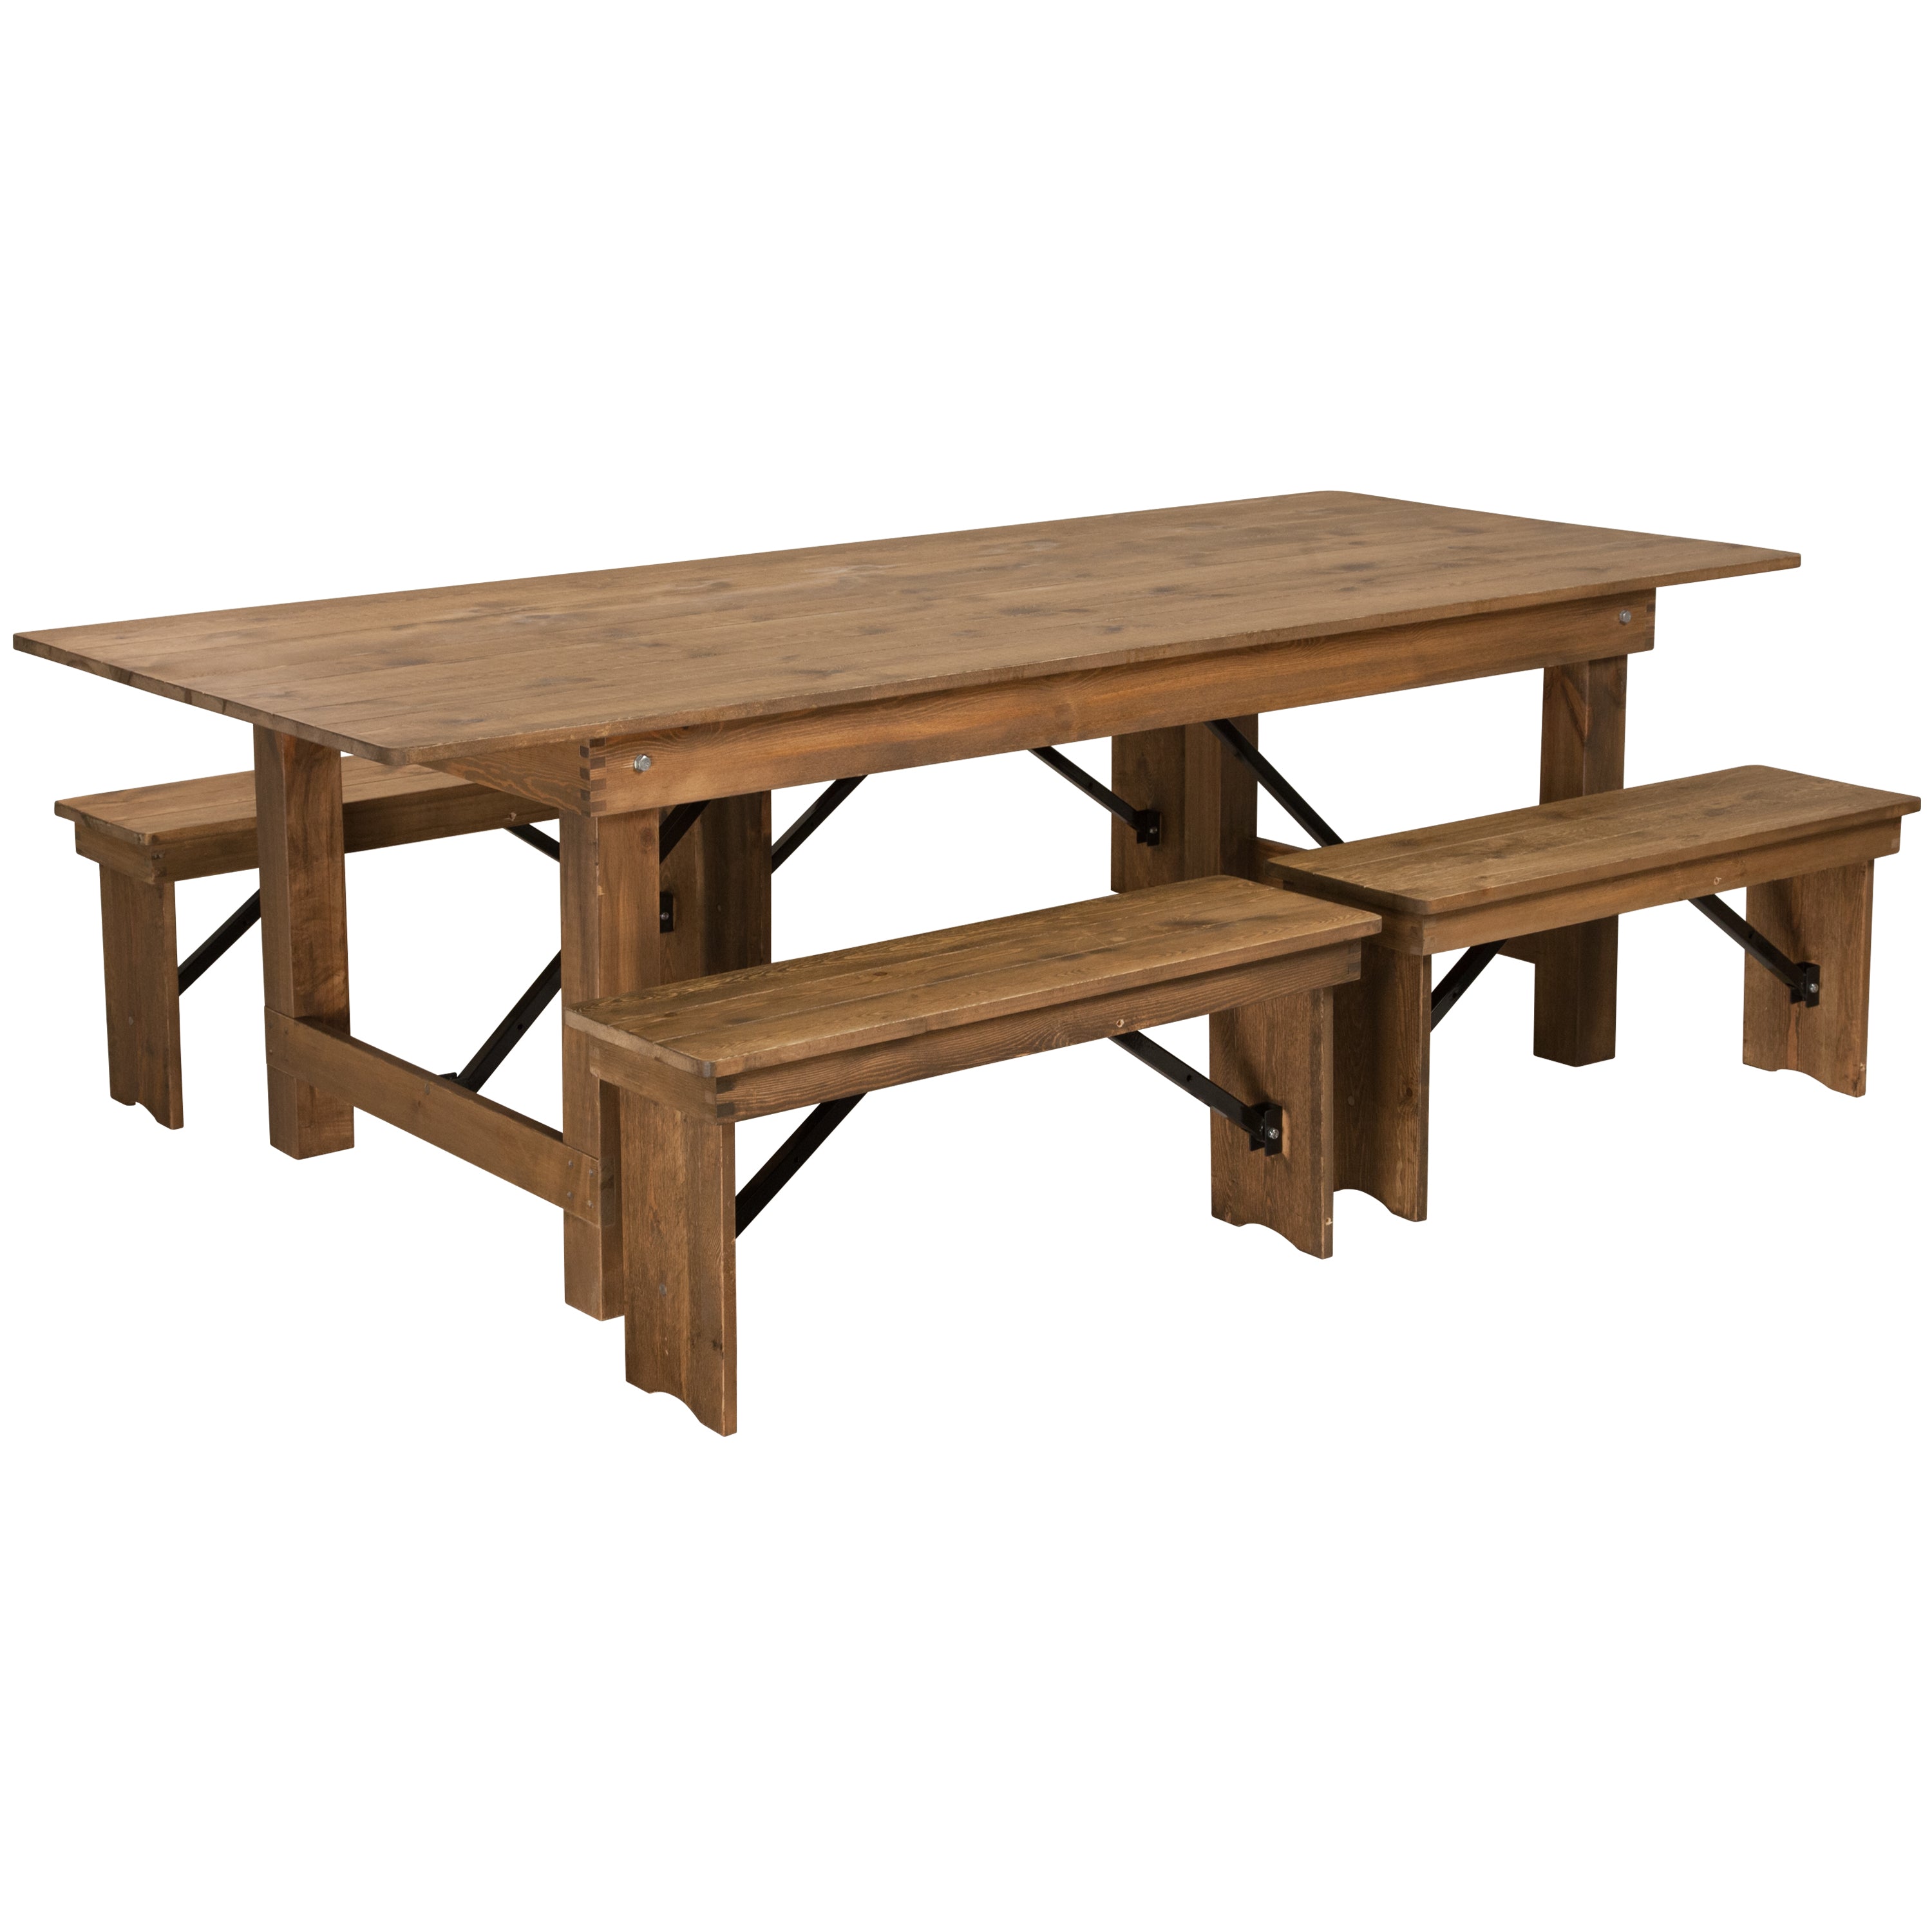 HERCULES Series 8' x 40'' Folding Farm Table and Four 40.25"L Bench Set-Dining Room Set-Flash Furniture-Wall2Wall Furnishings